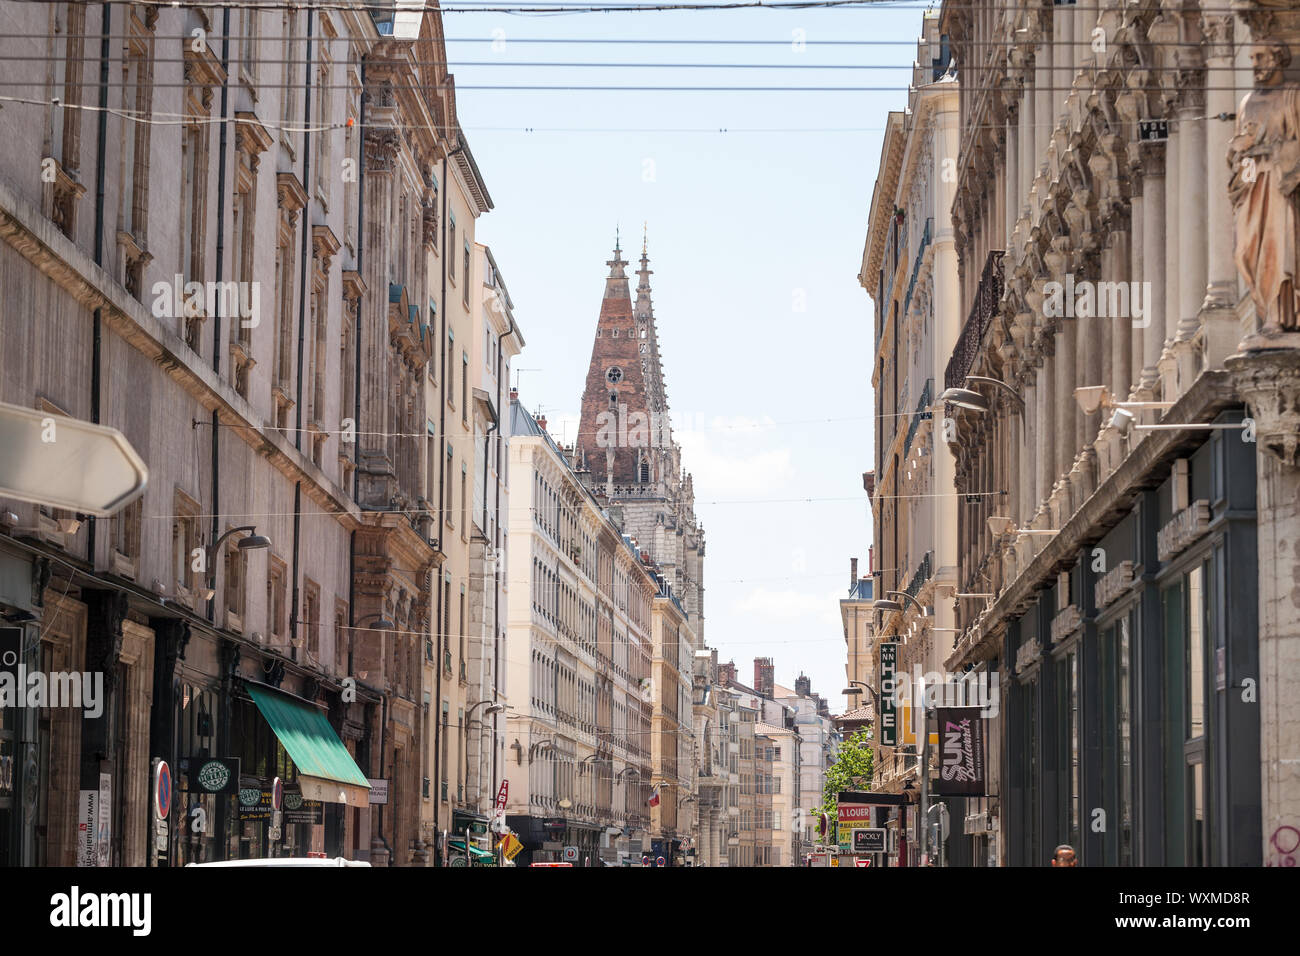 LYON, FRANCE - JULY 14, 2019: Eglise Saint Nizier Church on Rue Paul Chenavard Street in Lyon, France, with Haussmann style buildings and some commerc Stock Photo